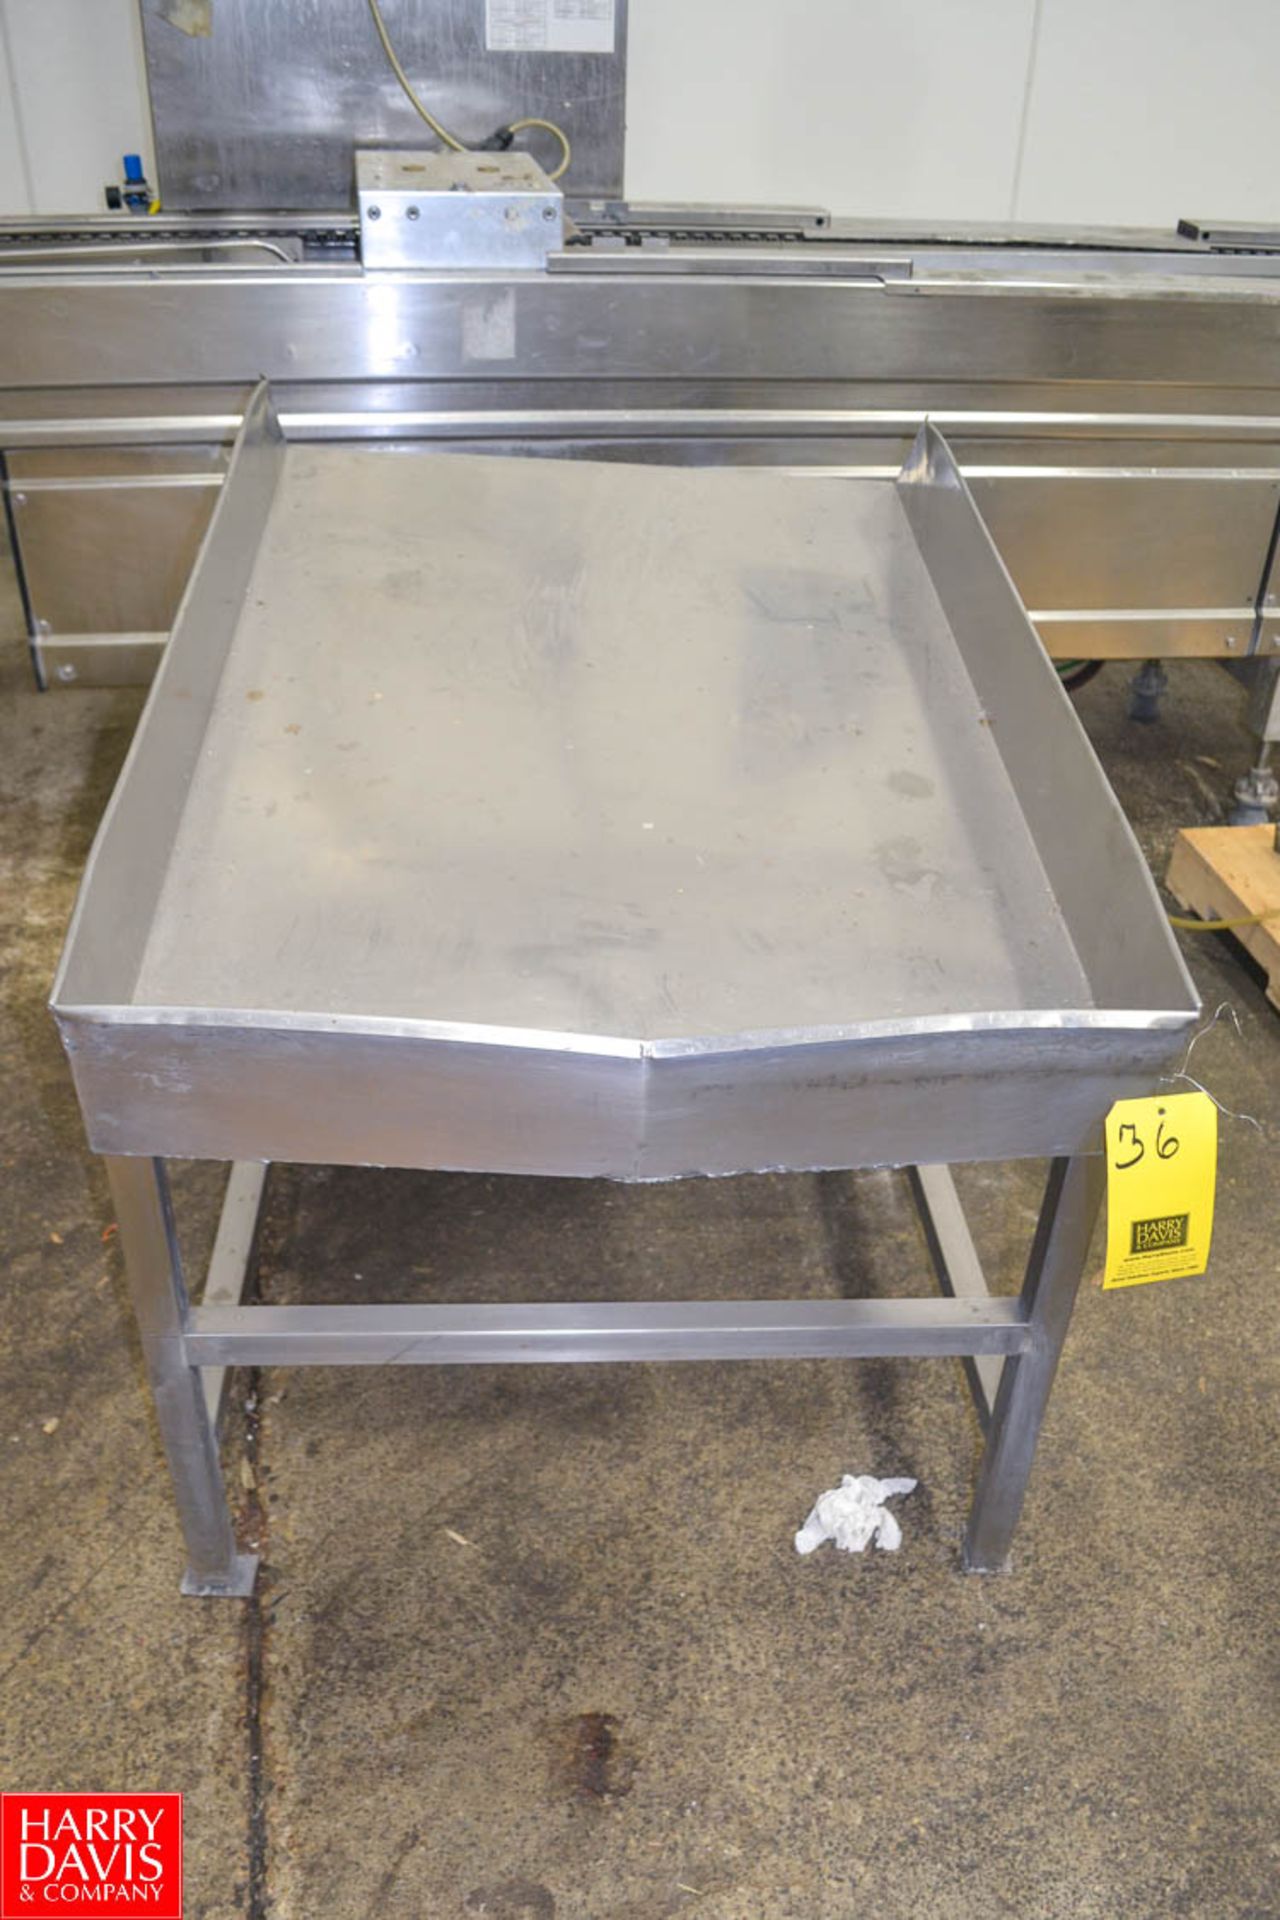 S/S Slant Table with Sides 45"L X 30"W X 33-37"H